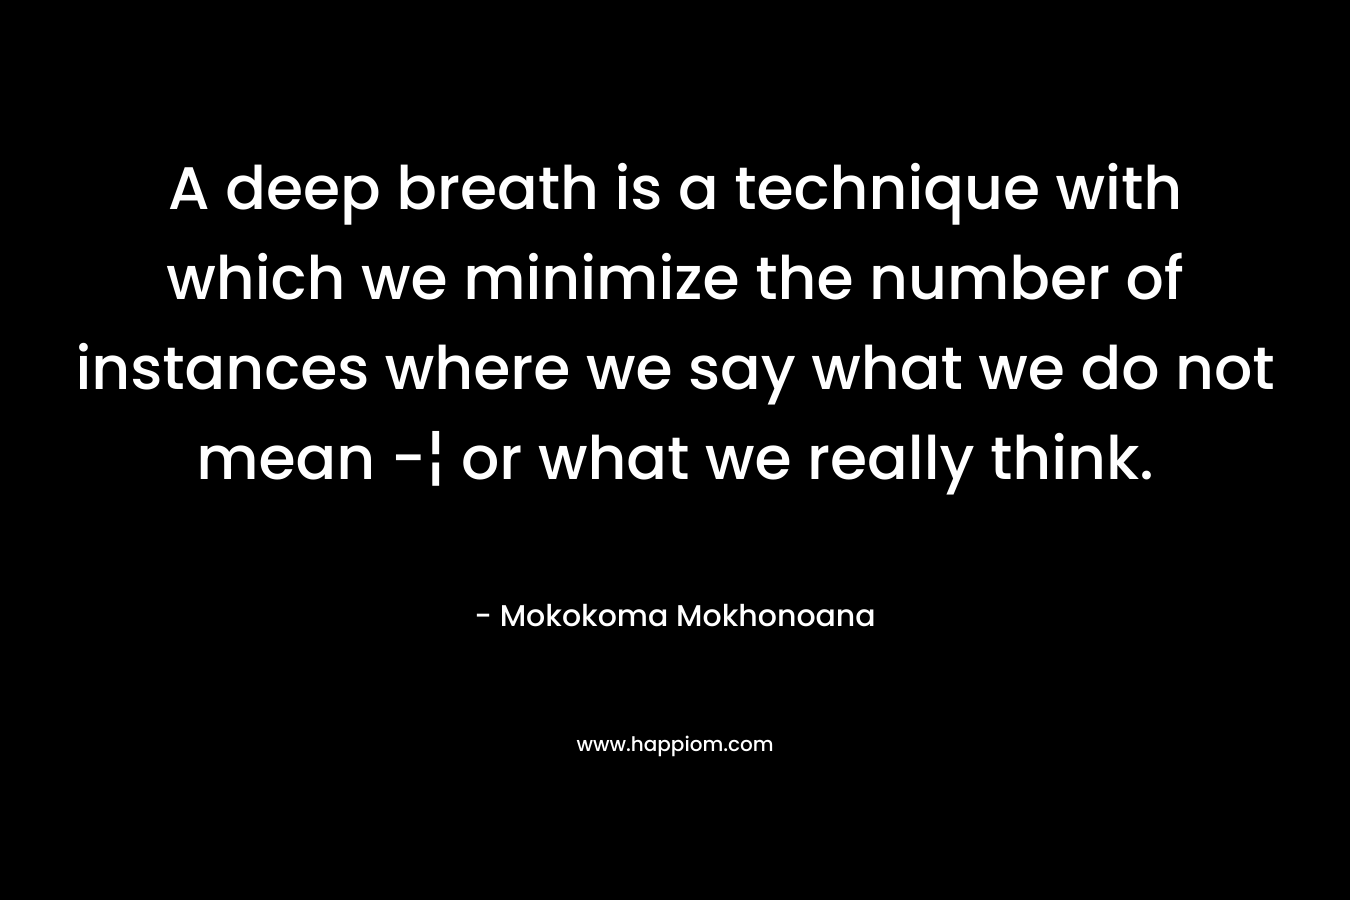 A deep breath is a technique with which we minimize the number of instances where we say what we do not mean -¦ or what we really think.